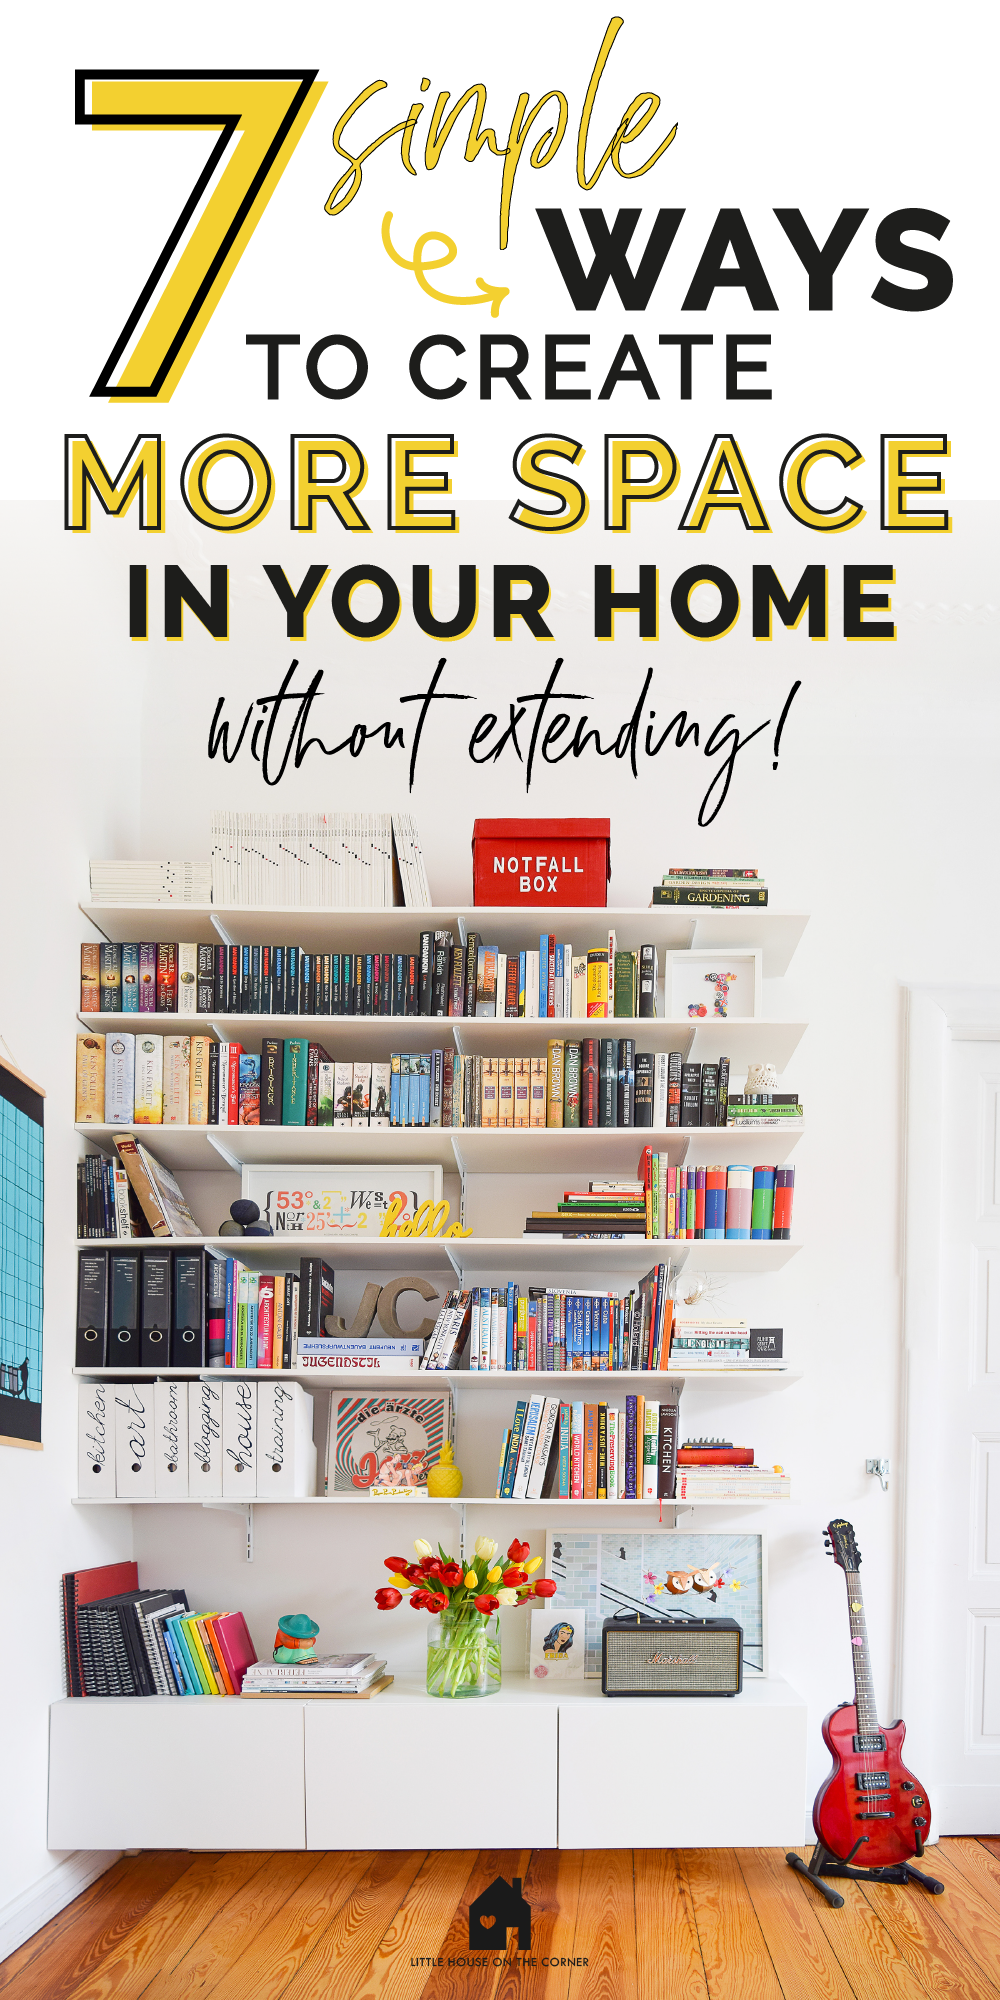 https://www.littlehouseonthecorner.com/wp-content/uploads/2021/02/7-Easy-Ways-To-Create-More-Space-In-Your-Home-Little-House-On-The-Corner.png